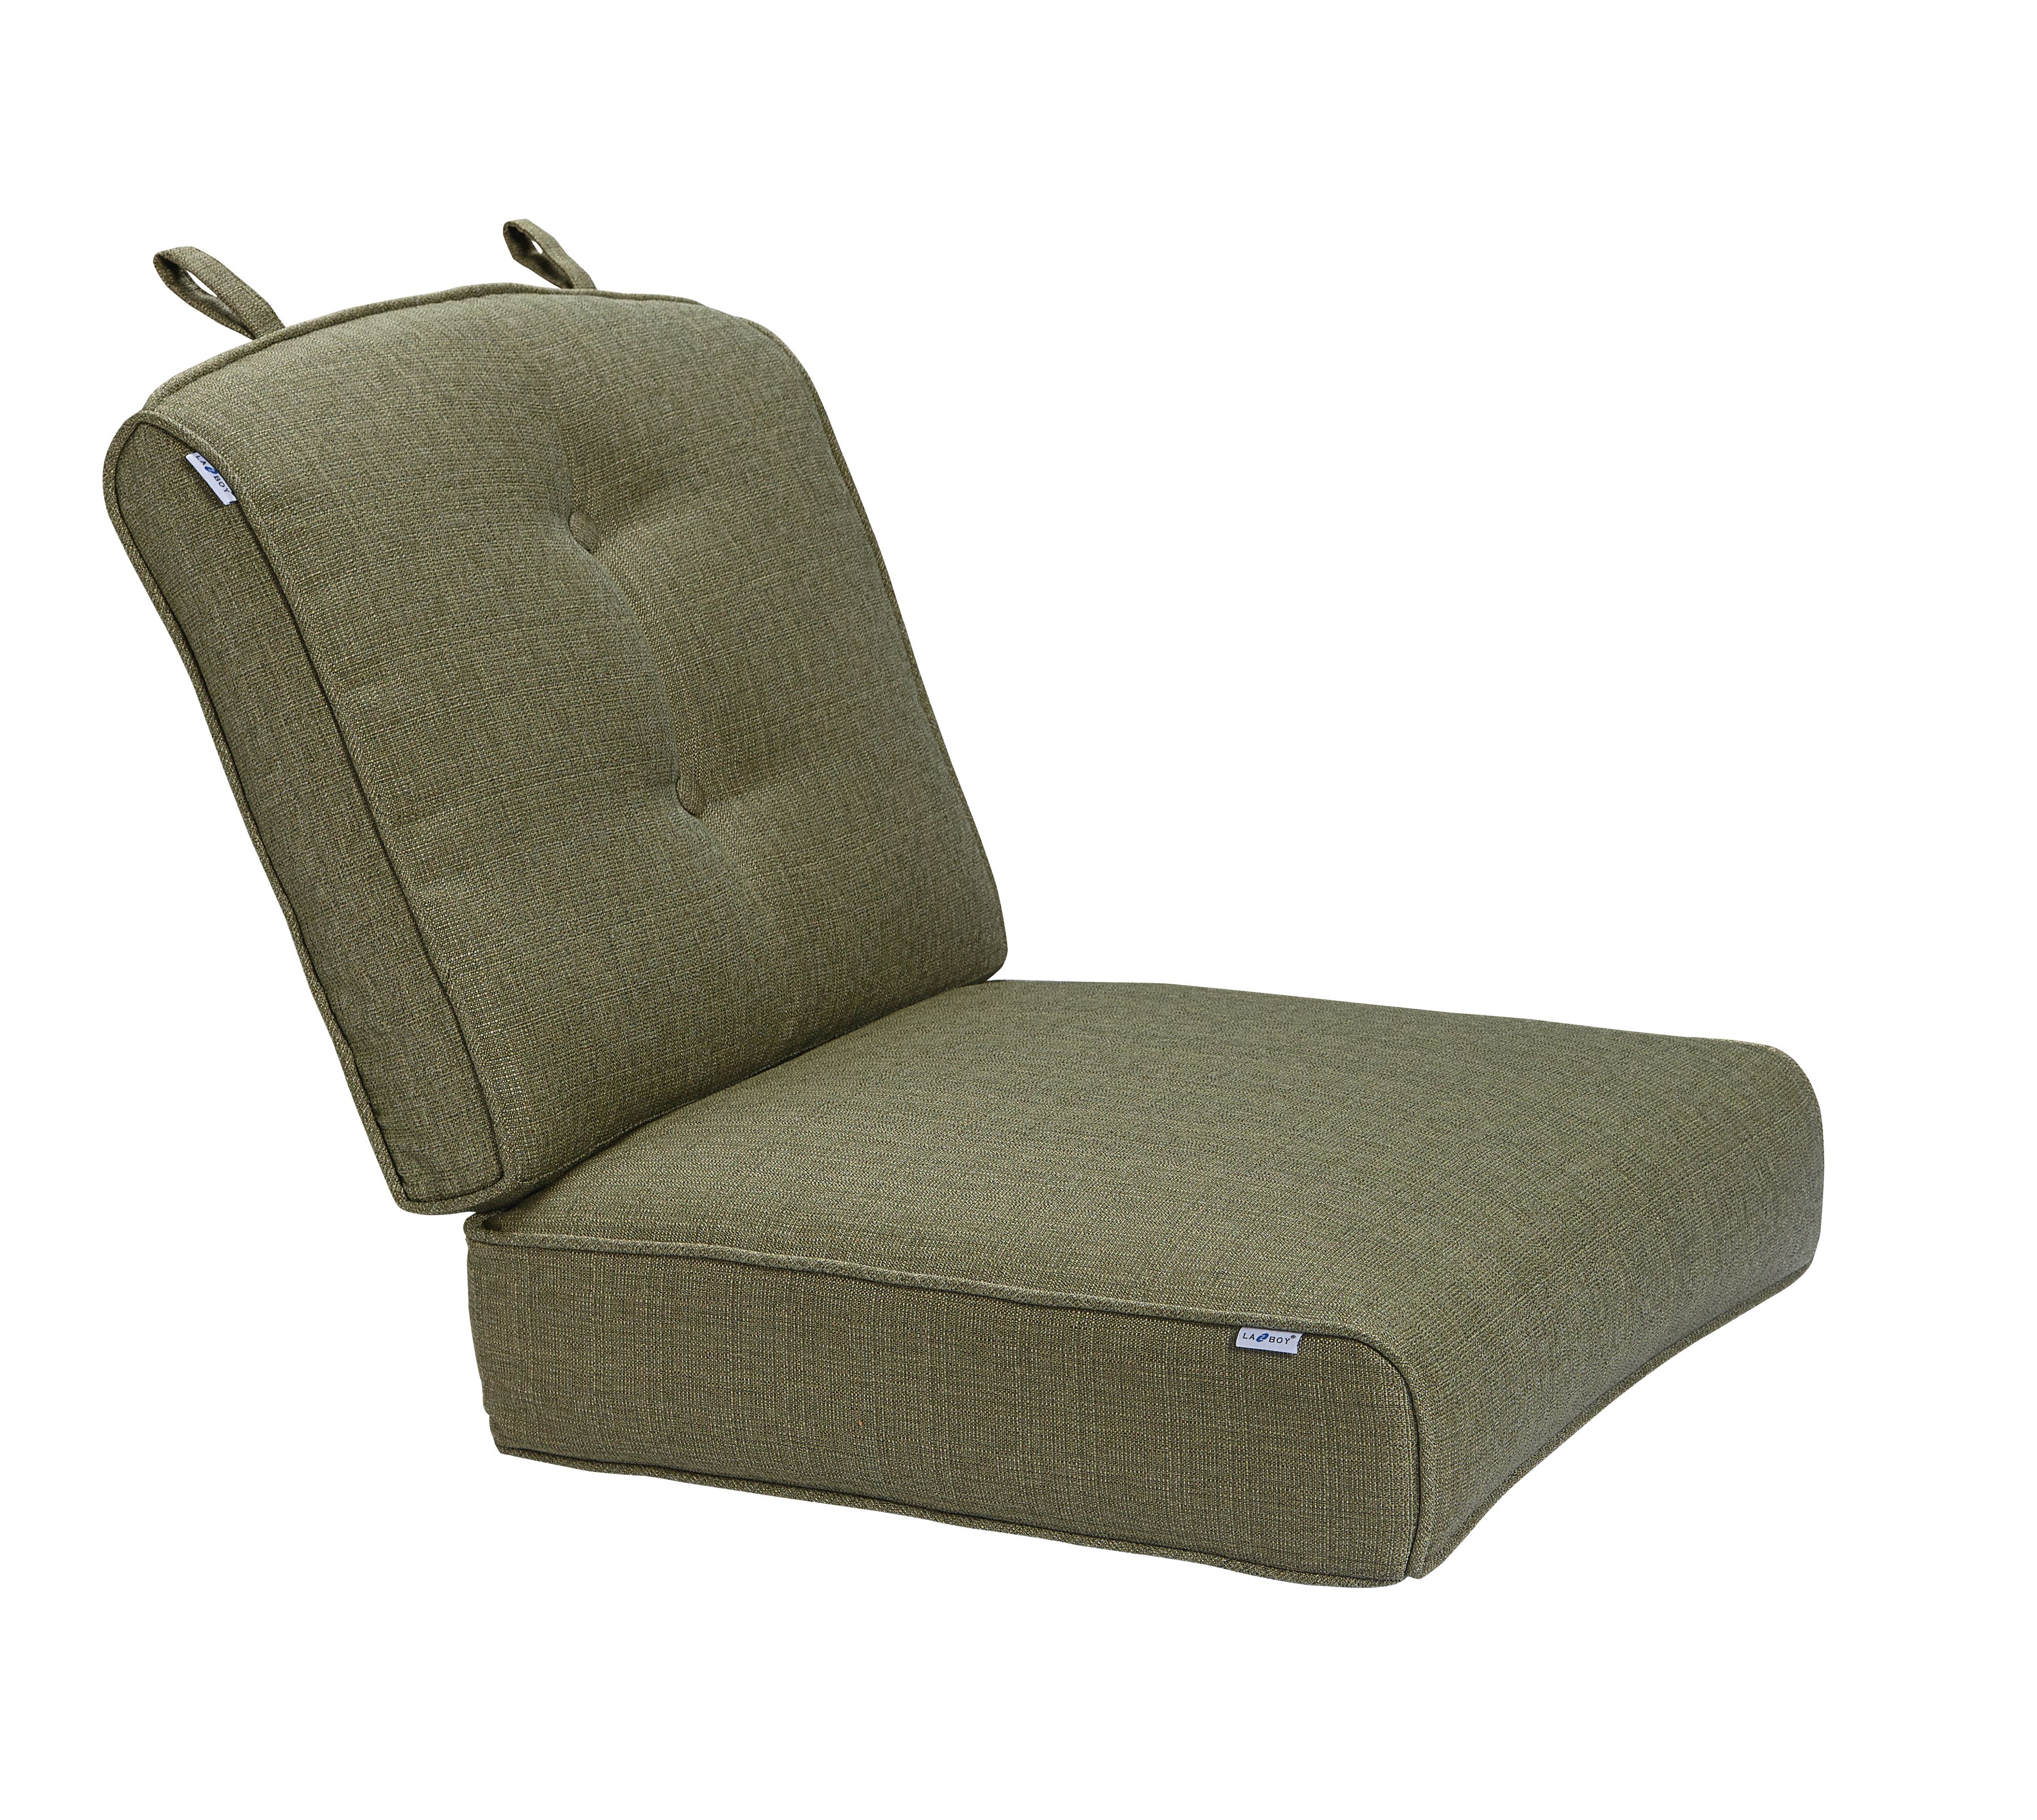 Kmart Chair Cushions Outdoor Off 56